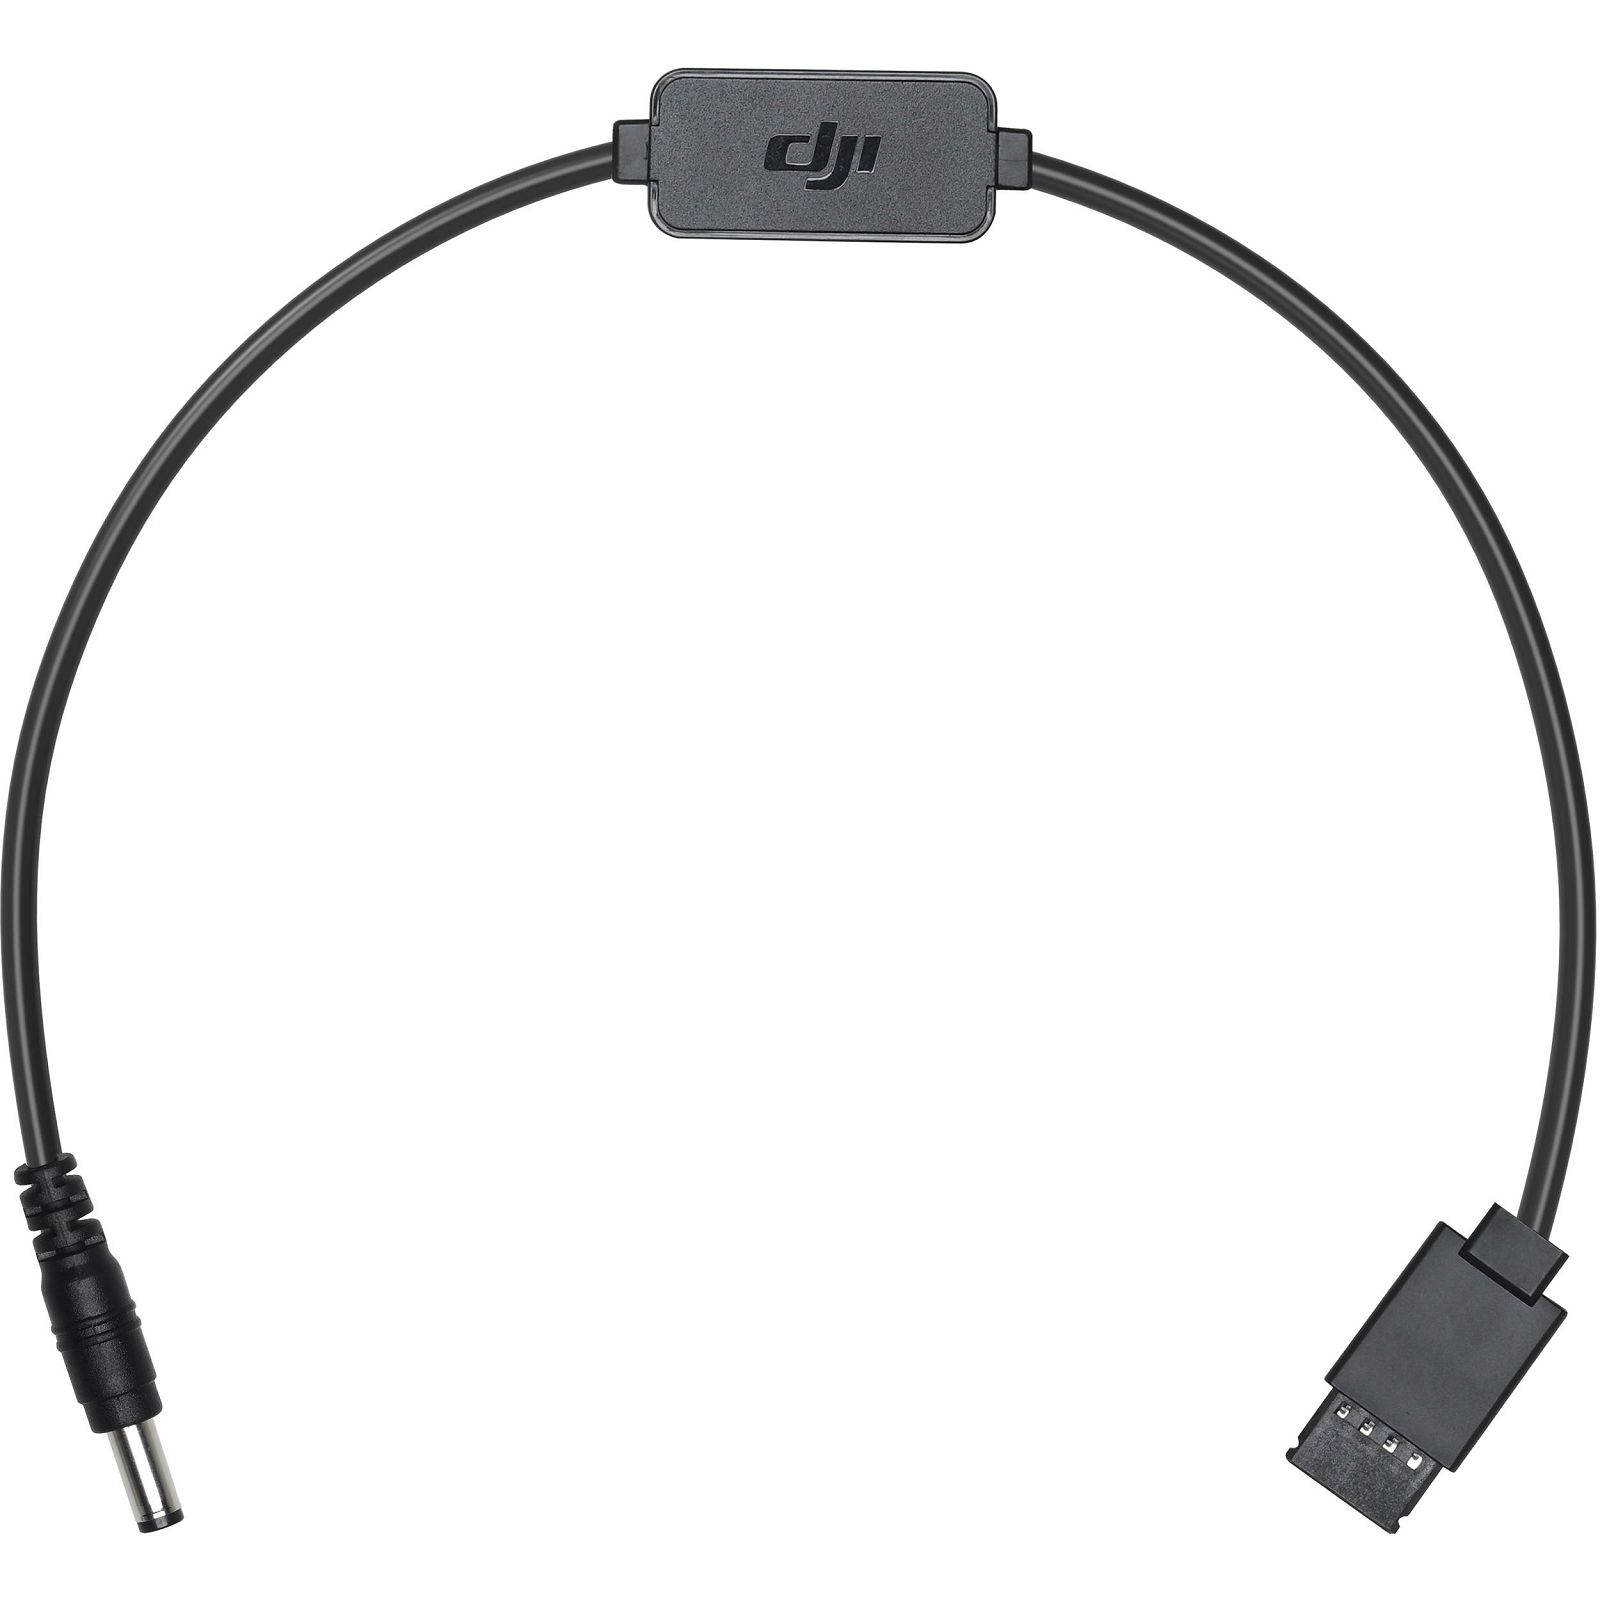 DJI Ronin-S Spare Part 09 DC Power Cable (CP.RN.00000015.01)